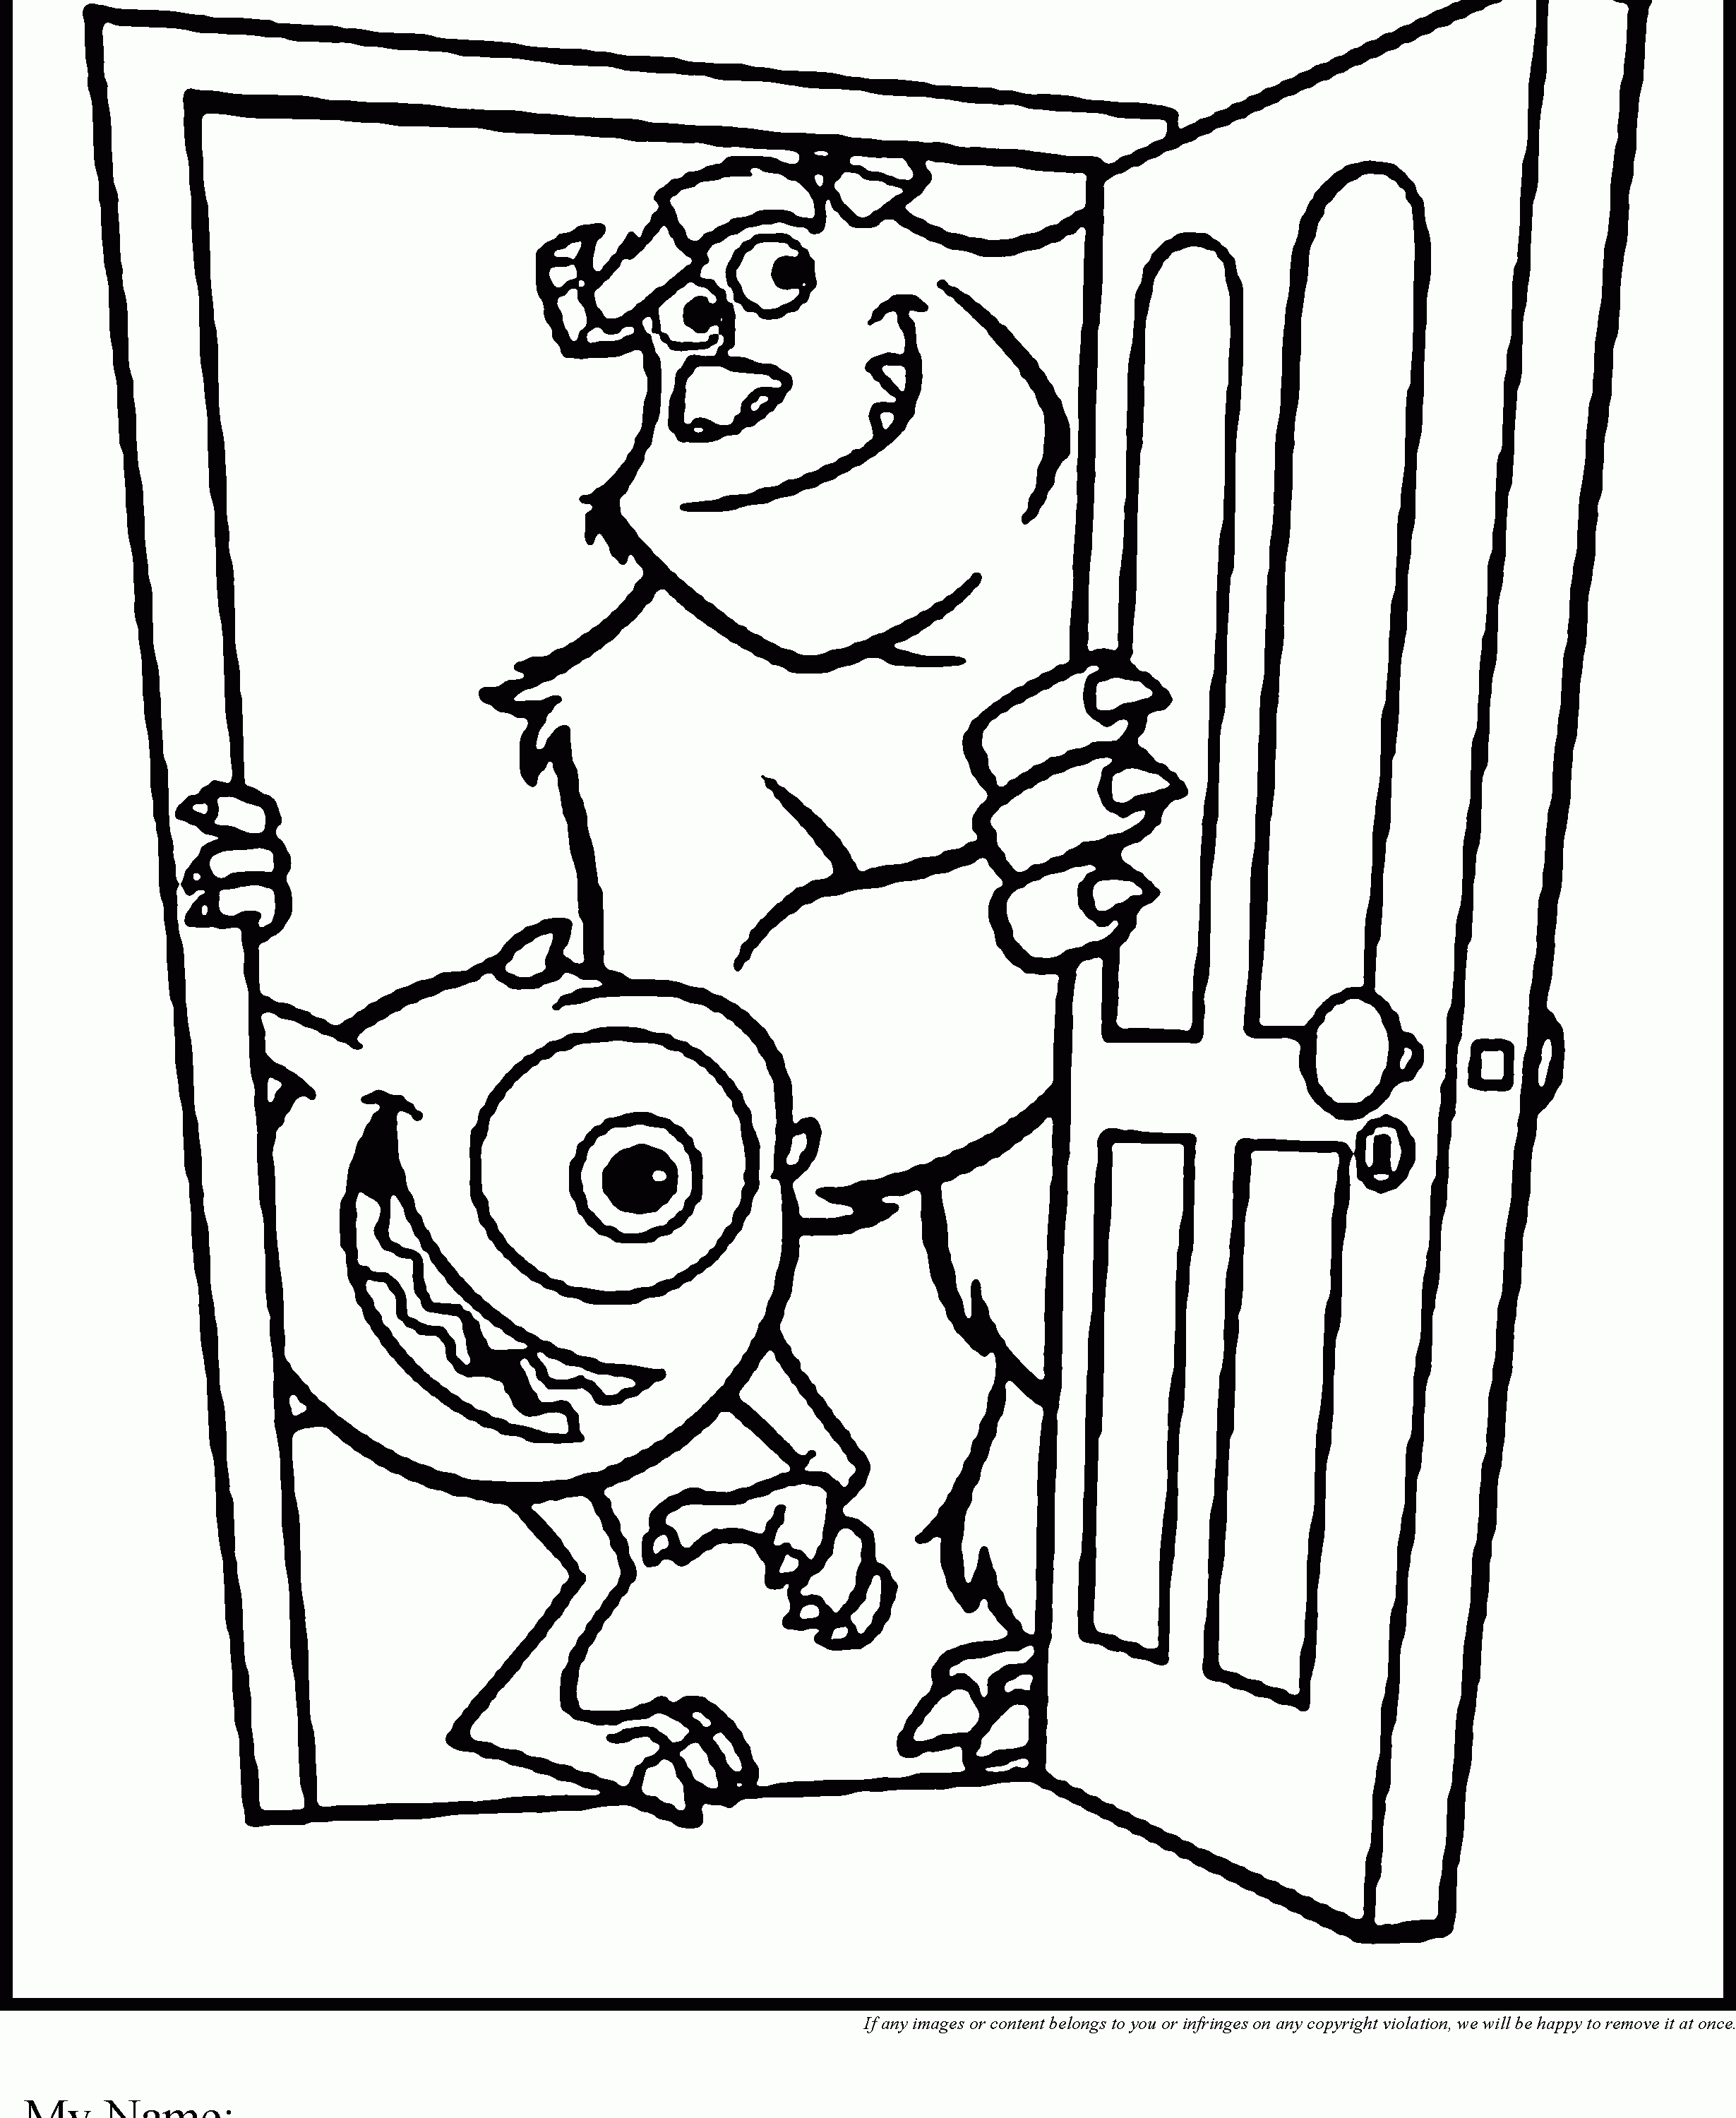 277 Cartoon Printable Monsters Inc Coloring Pages with disney character